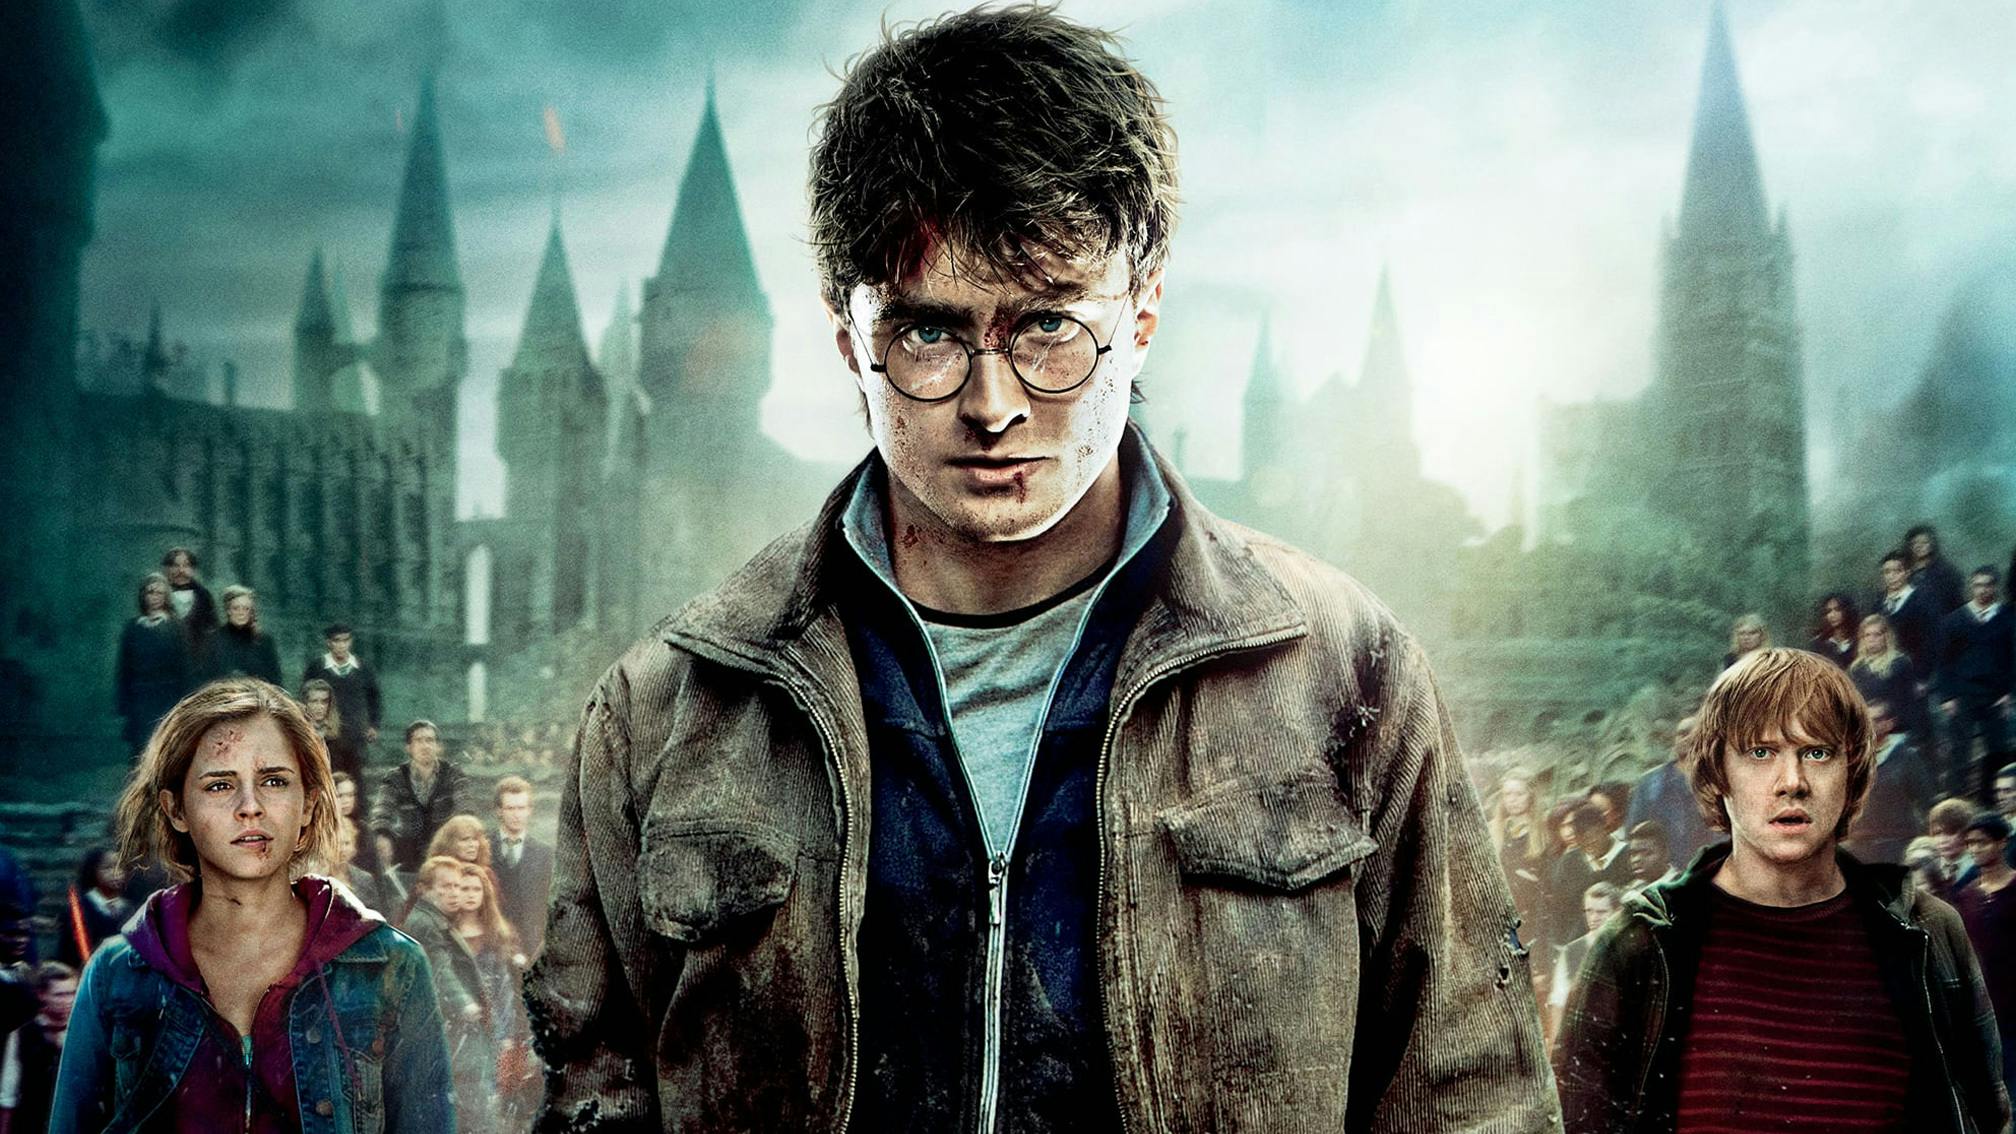 Harry Potter props including Daniel Radcliffe's wand and glasses to go up for auction